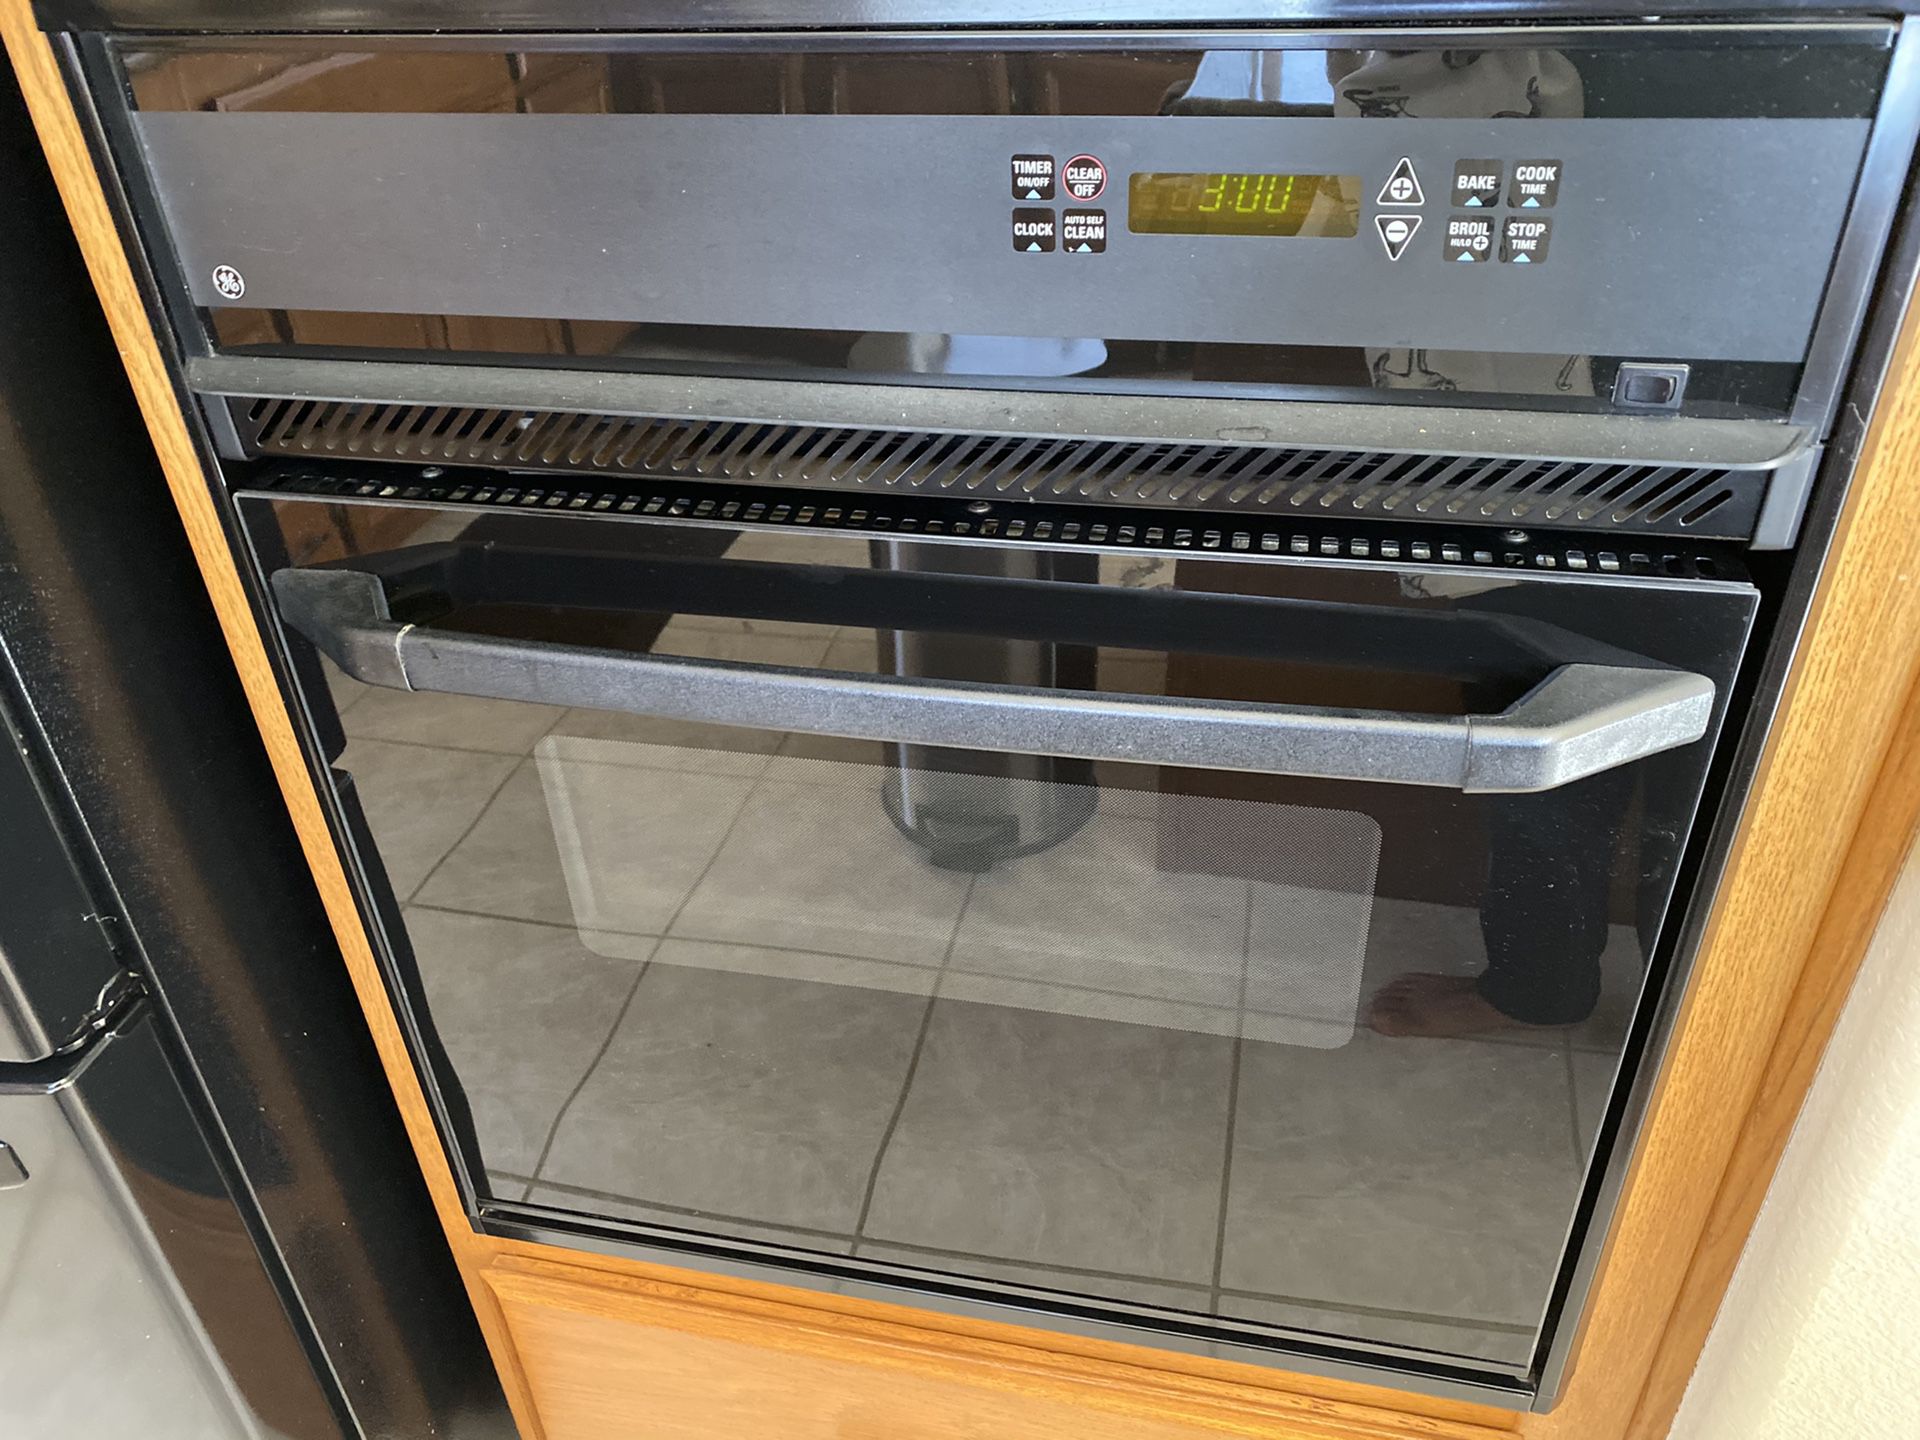 Free. GE built-in Oven in Escondido